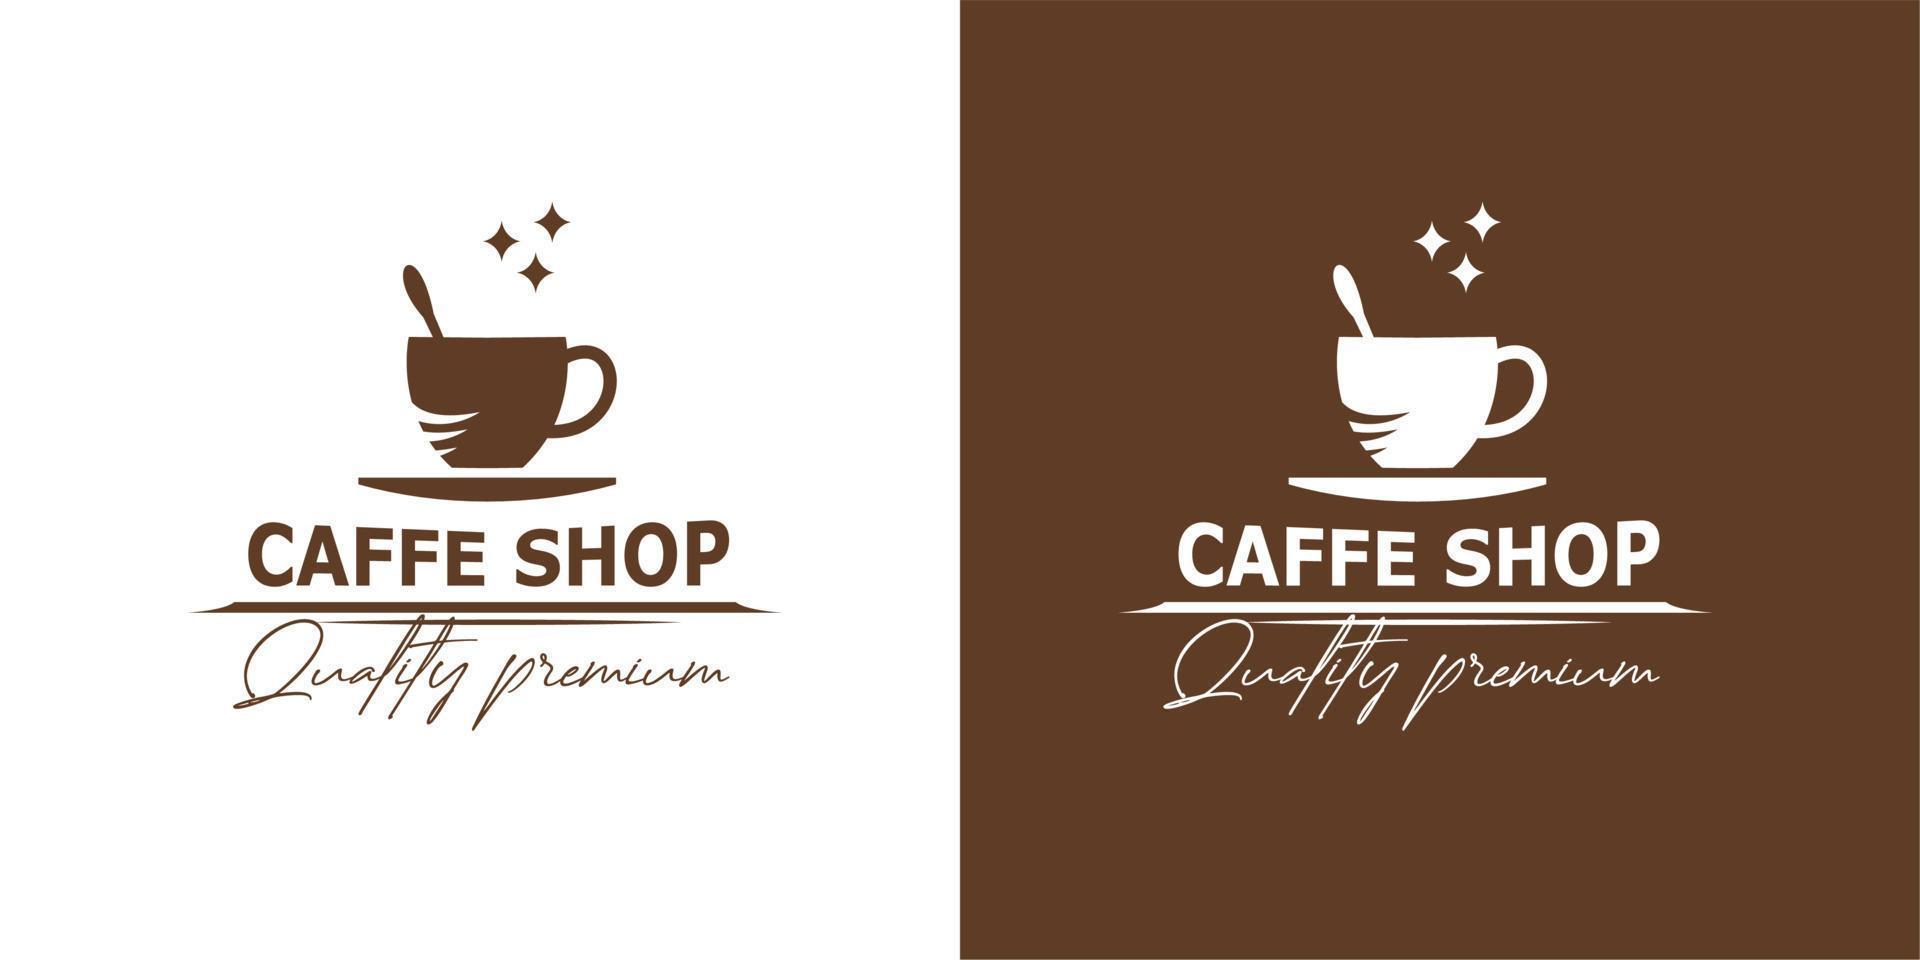 illustration logo vector graphic of drinking hot coffee cup and the small spoon. perfect for cafe shop or coffee house logo with the best premium quality coffee bean. caffeine